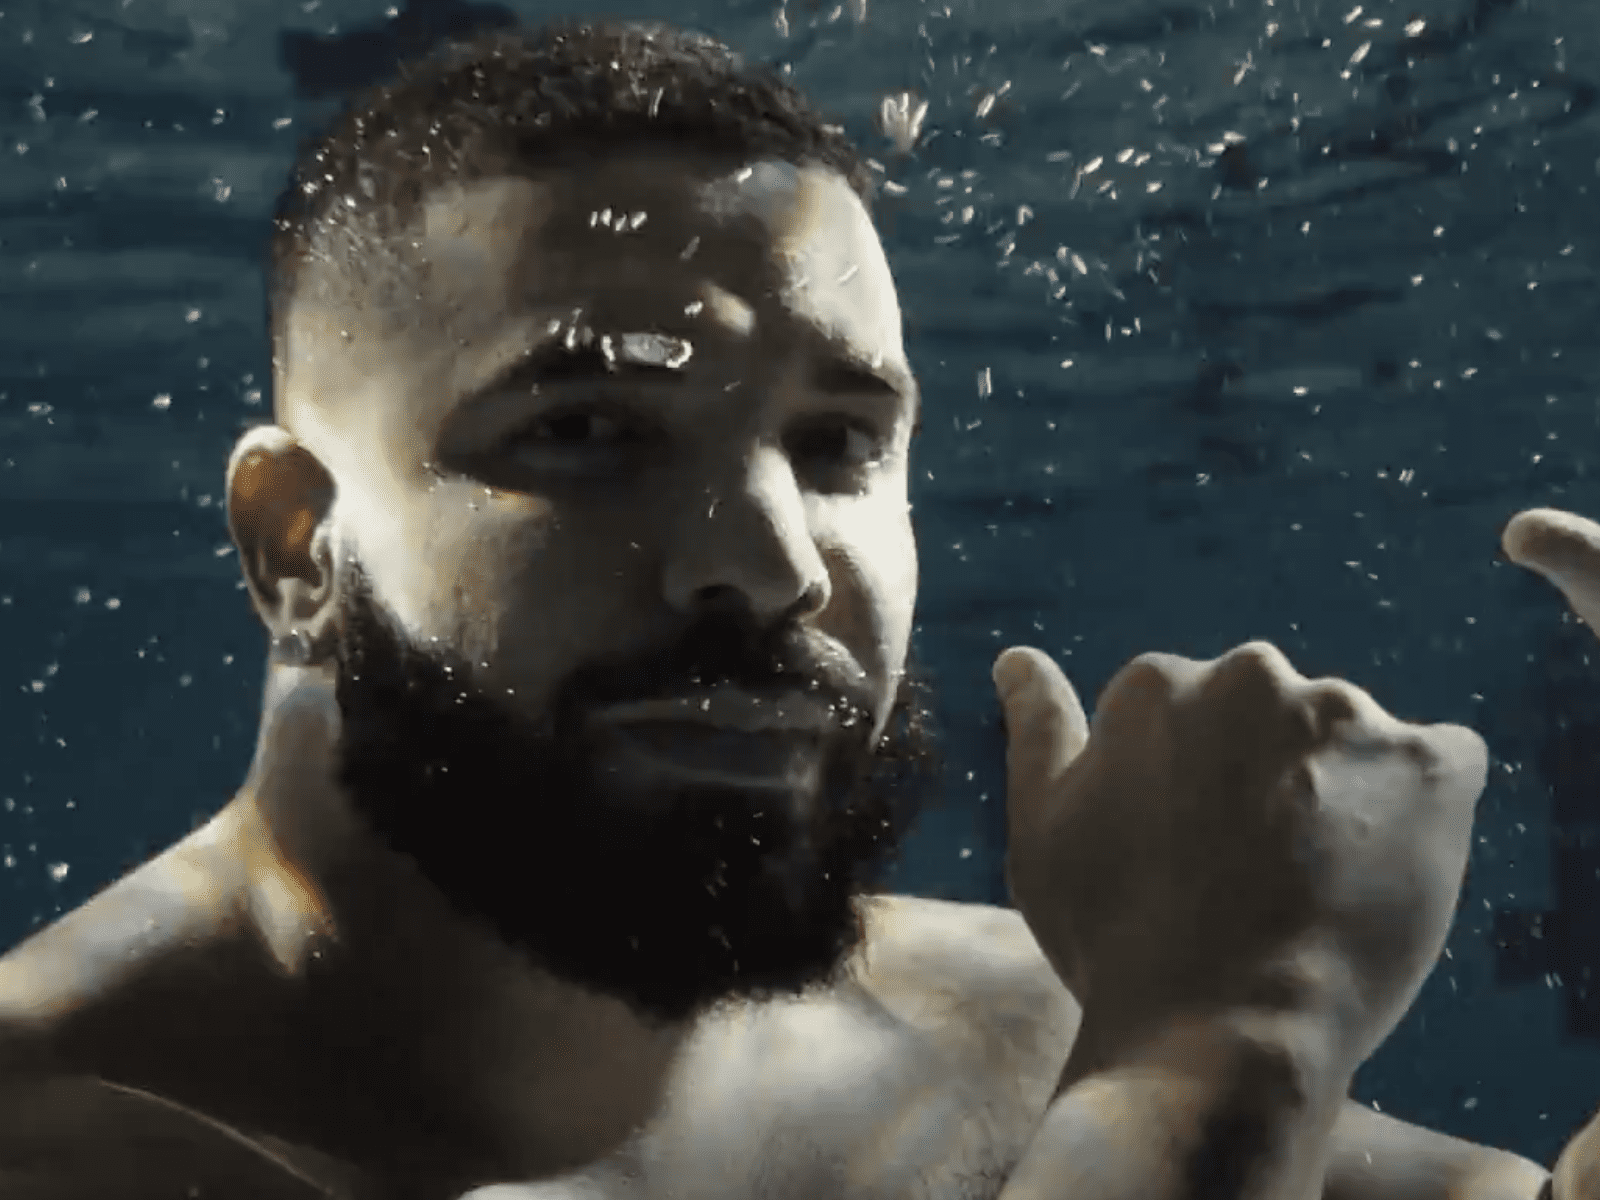 Video: Drake is Feeling SLIMWAV's Cover of Laugh Now, Cry Later